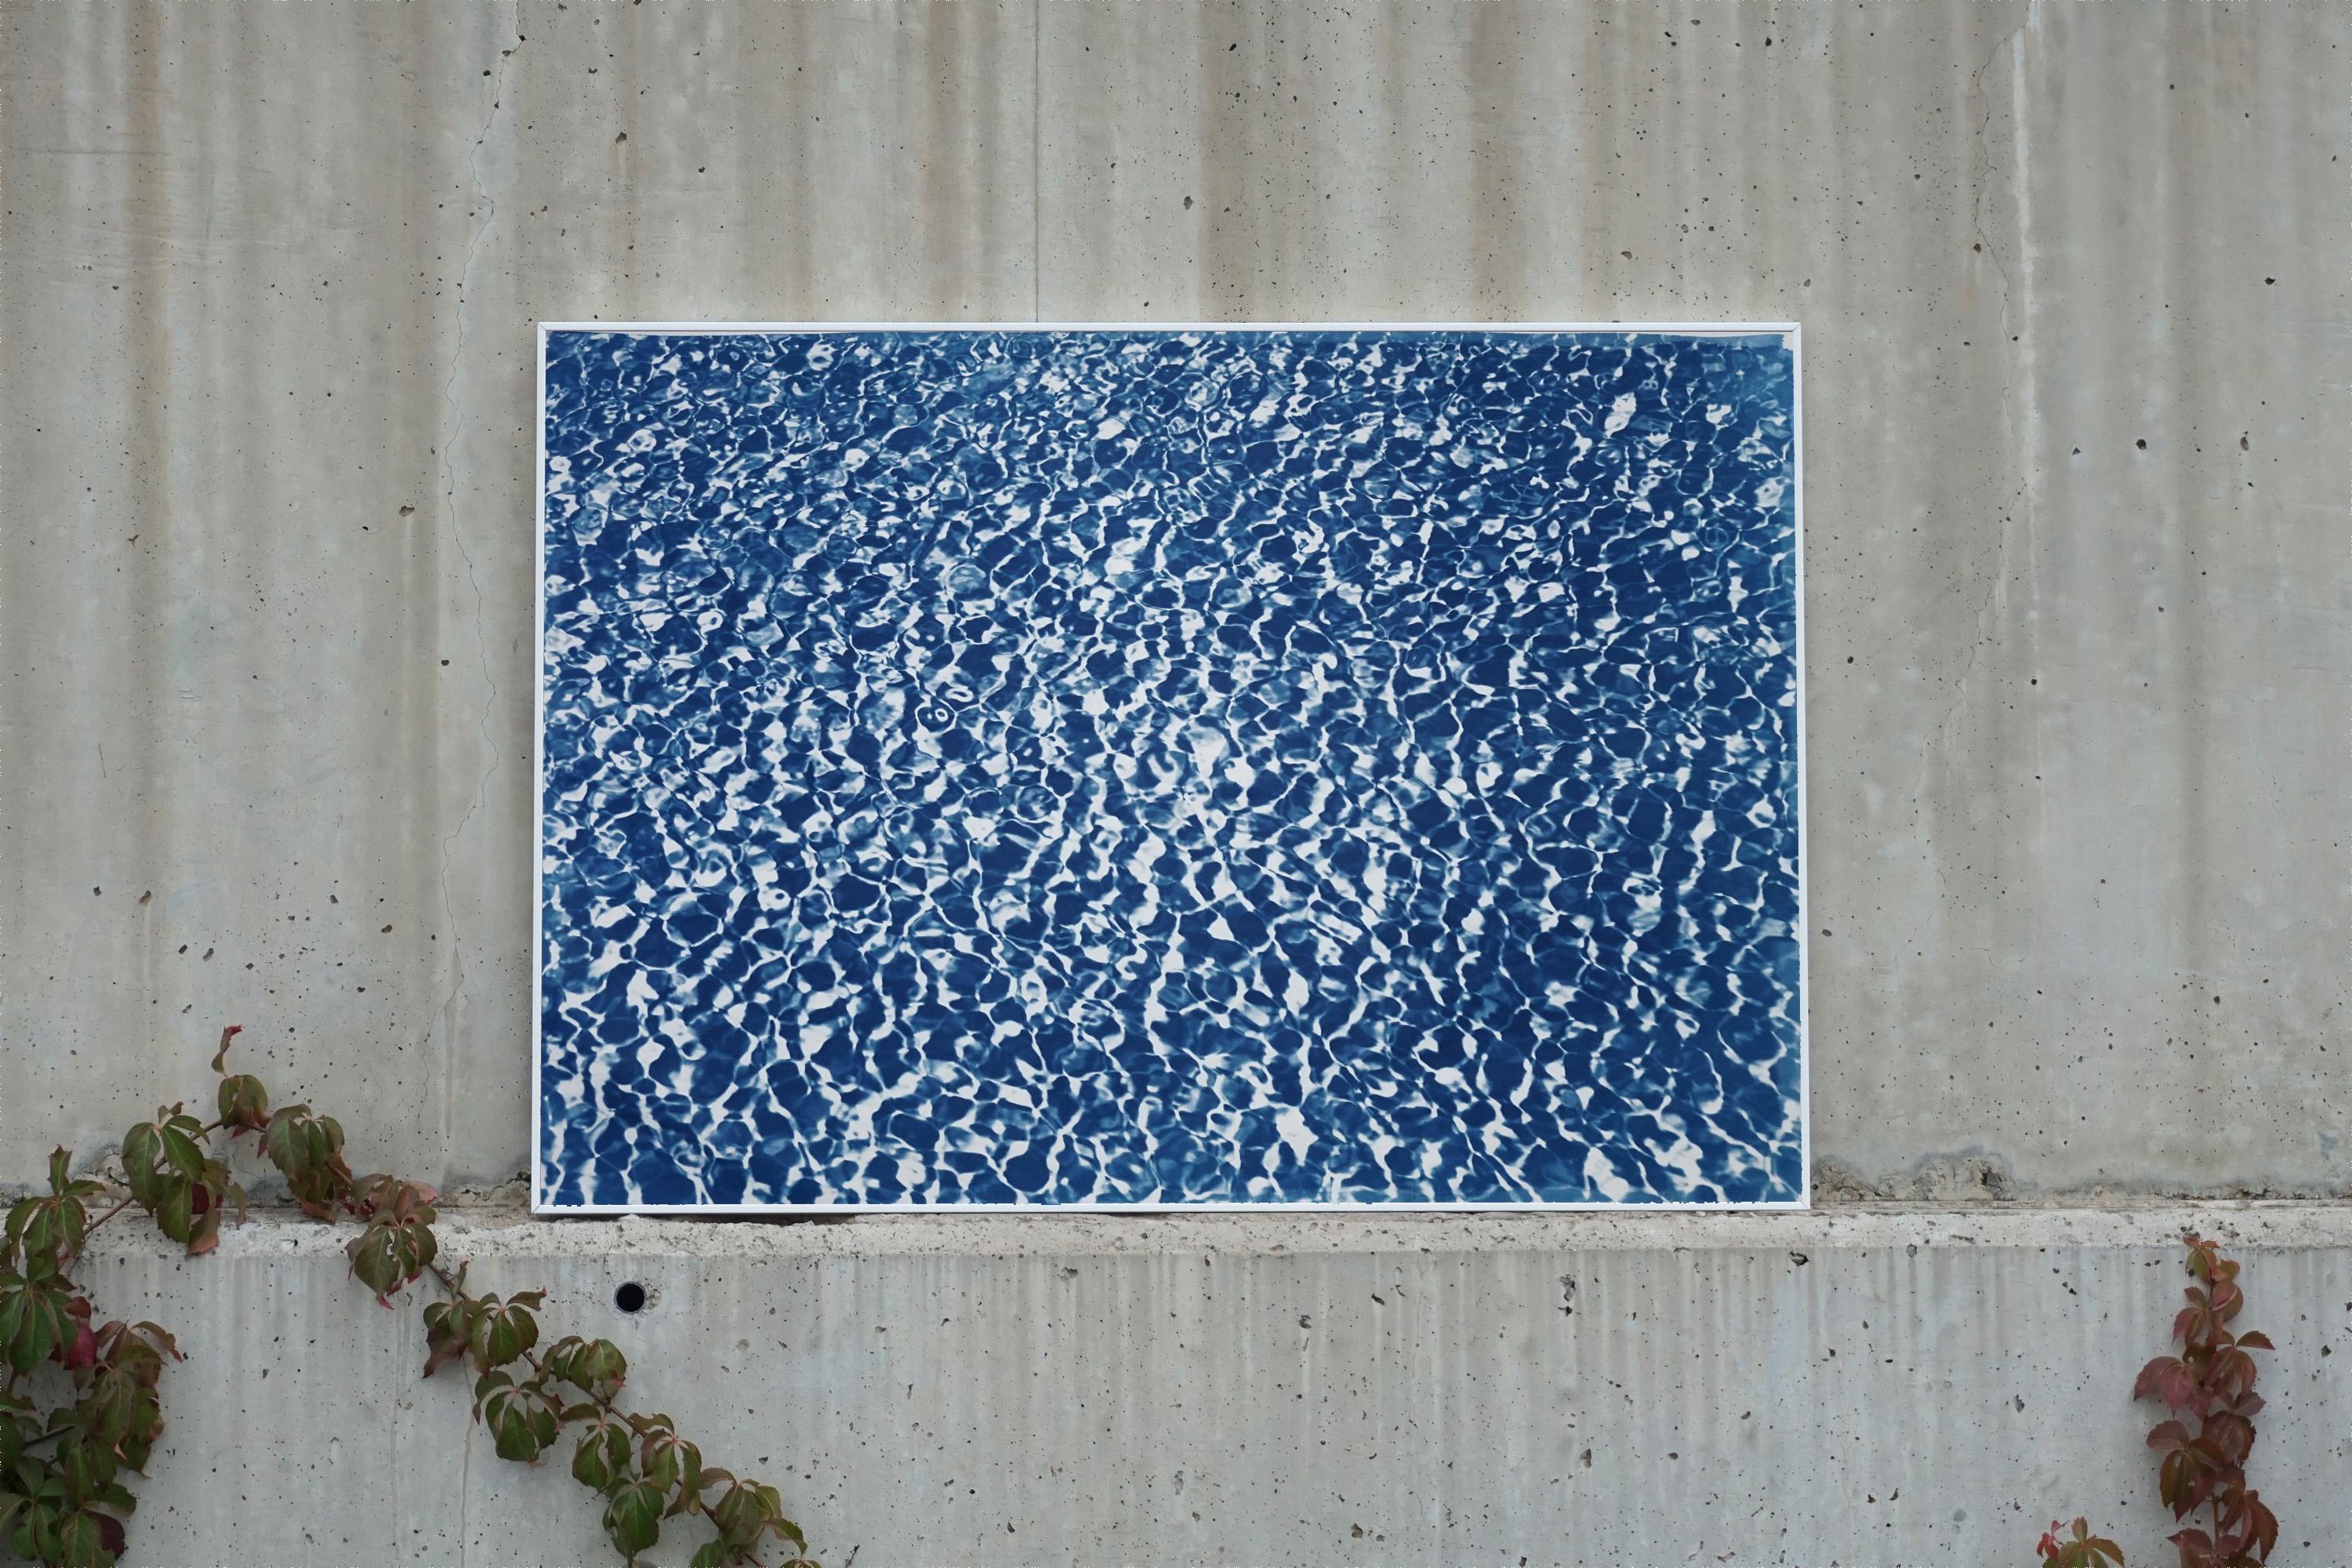 Infinity Pool Water Reflections, Blue & White Pattern, Handmade Cyanotype Print - Photograph by Kind of Cyan